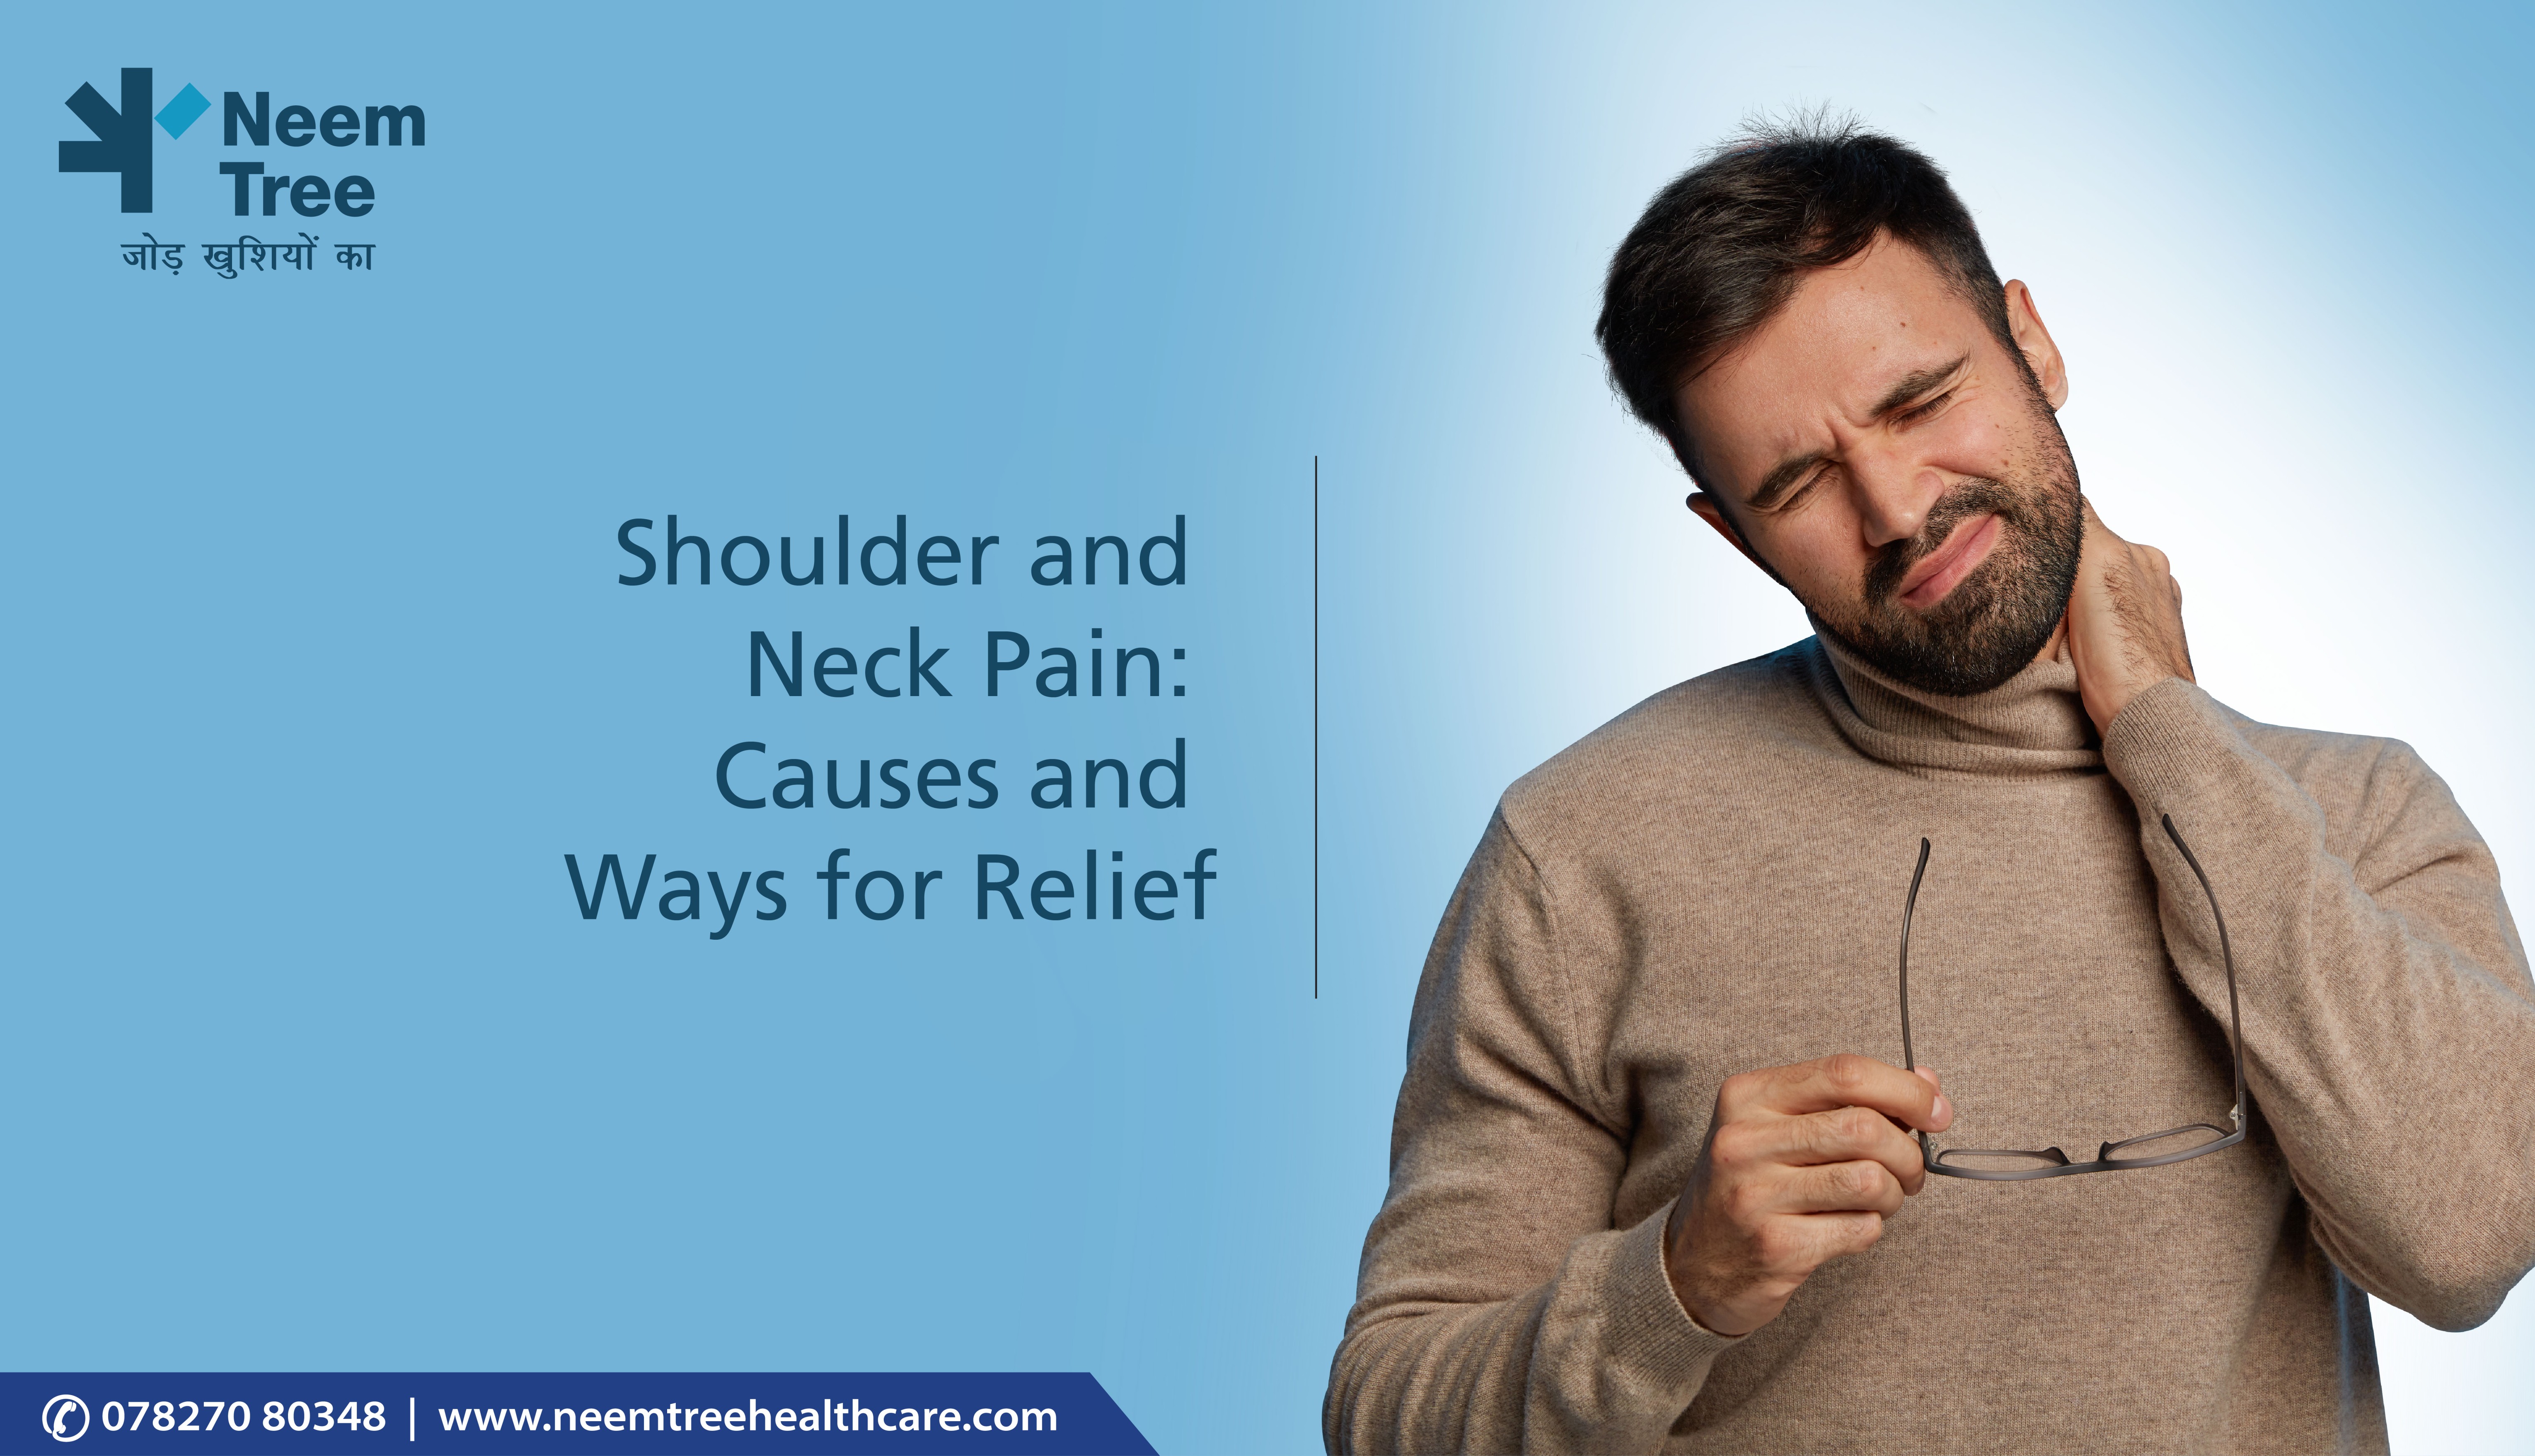 Shoulder and Neck Pain: Causes and Ways for Relief